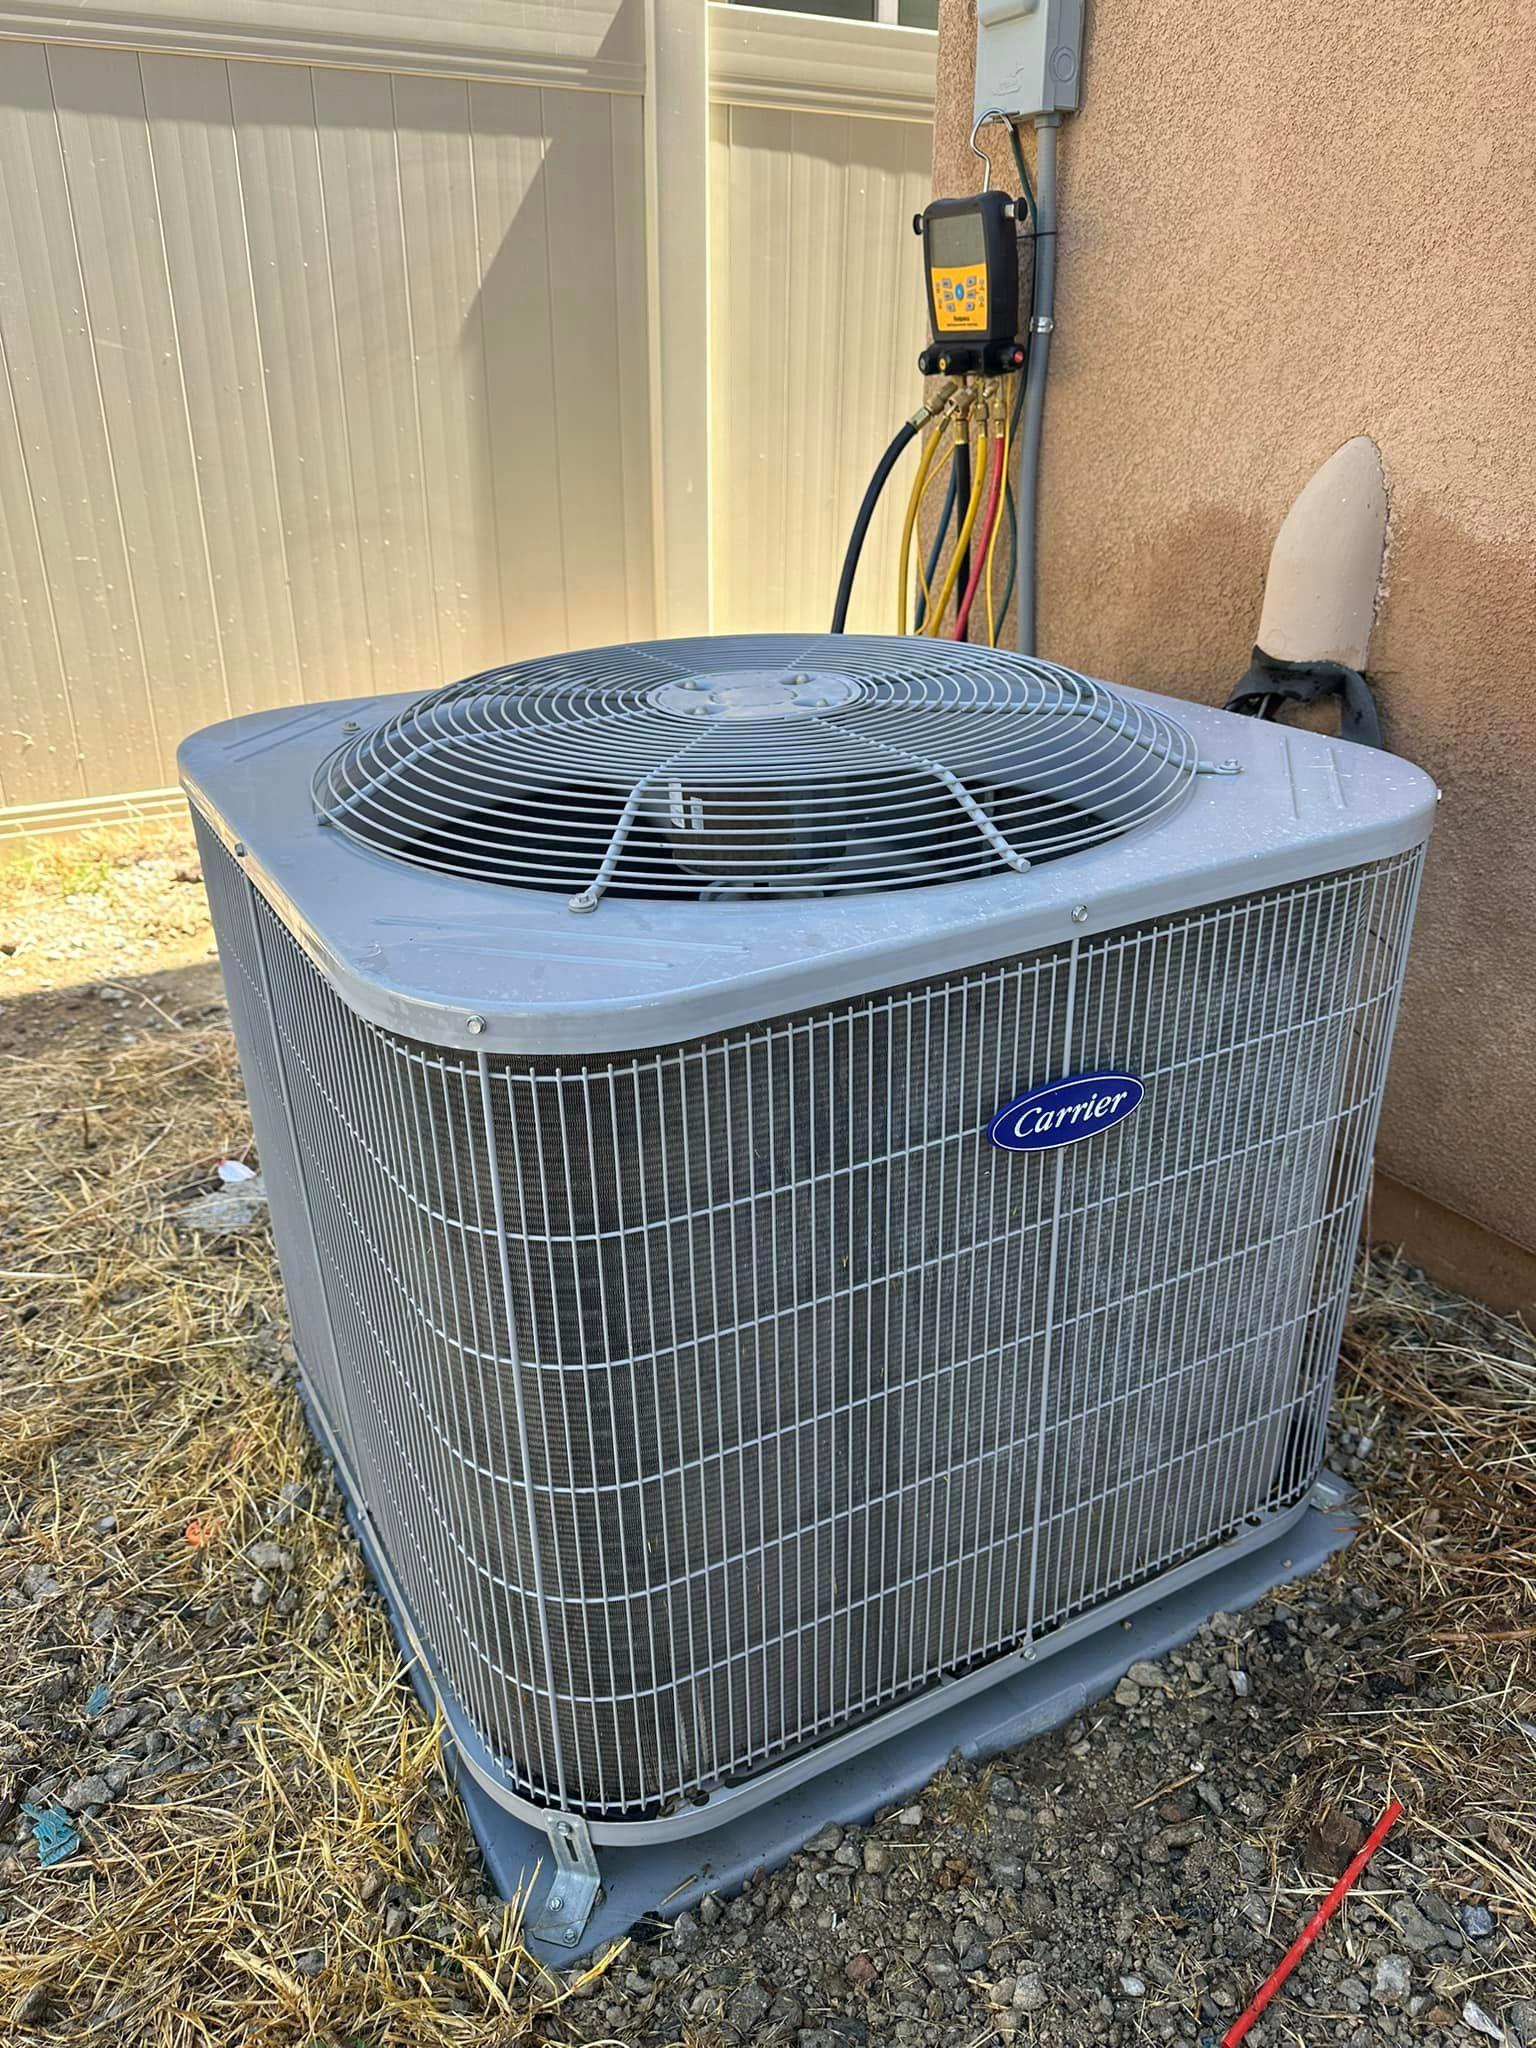 With a stellar reputation for excellence in the industry, Luxurious Heating & Air Conditioning Inc has become the go-to choice for Menifee residents seeking luxurious and reliable climate control services.